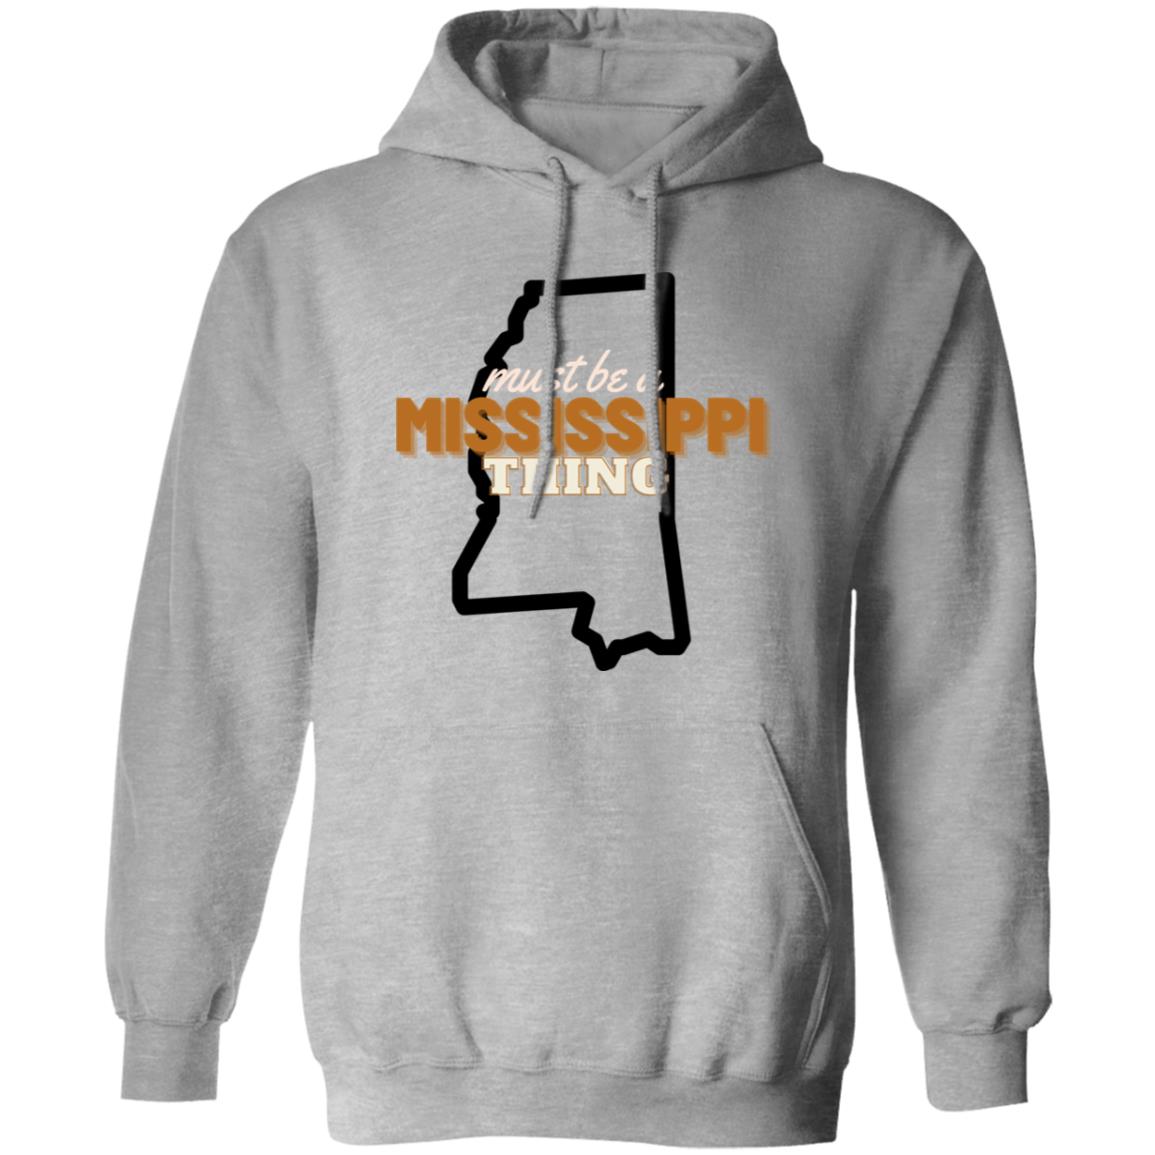 Mississippi G185 Pullover Hoodie (must be a Mississippi thing)